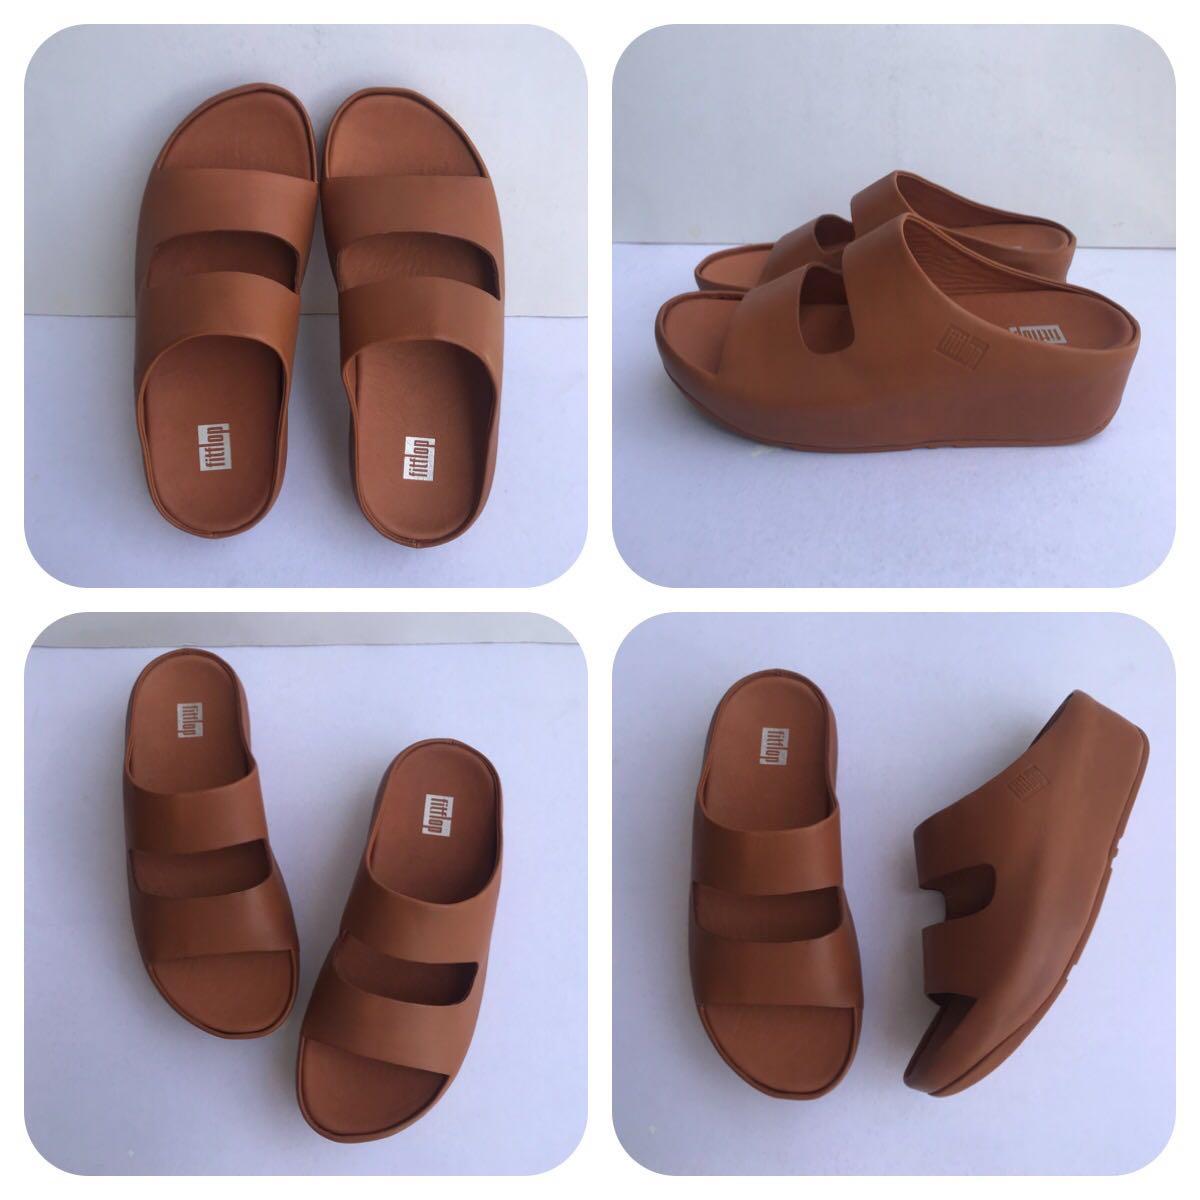 Vionic Orthotic Sandals in Tan Real Leather, Women's Fashion, Footwear,  Sandals on Carousell